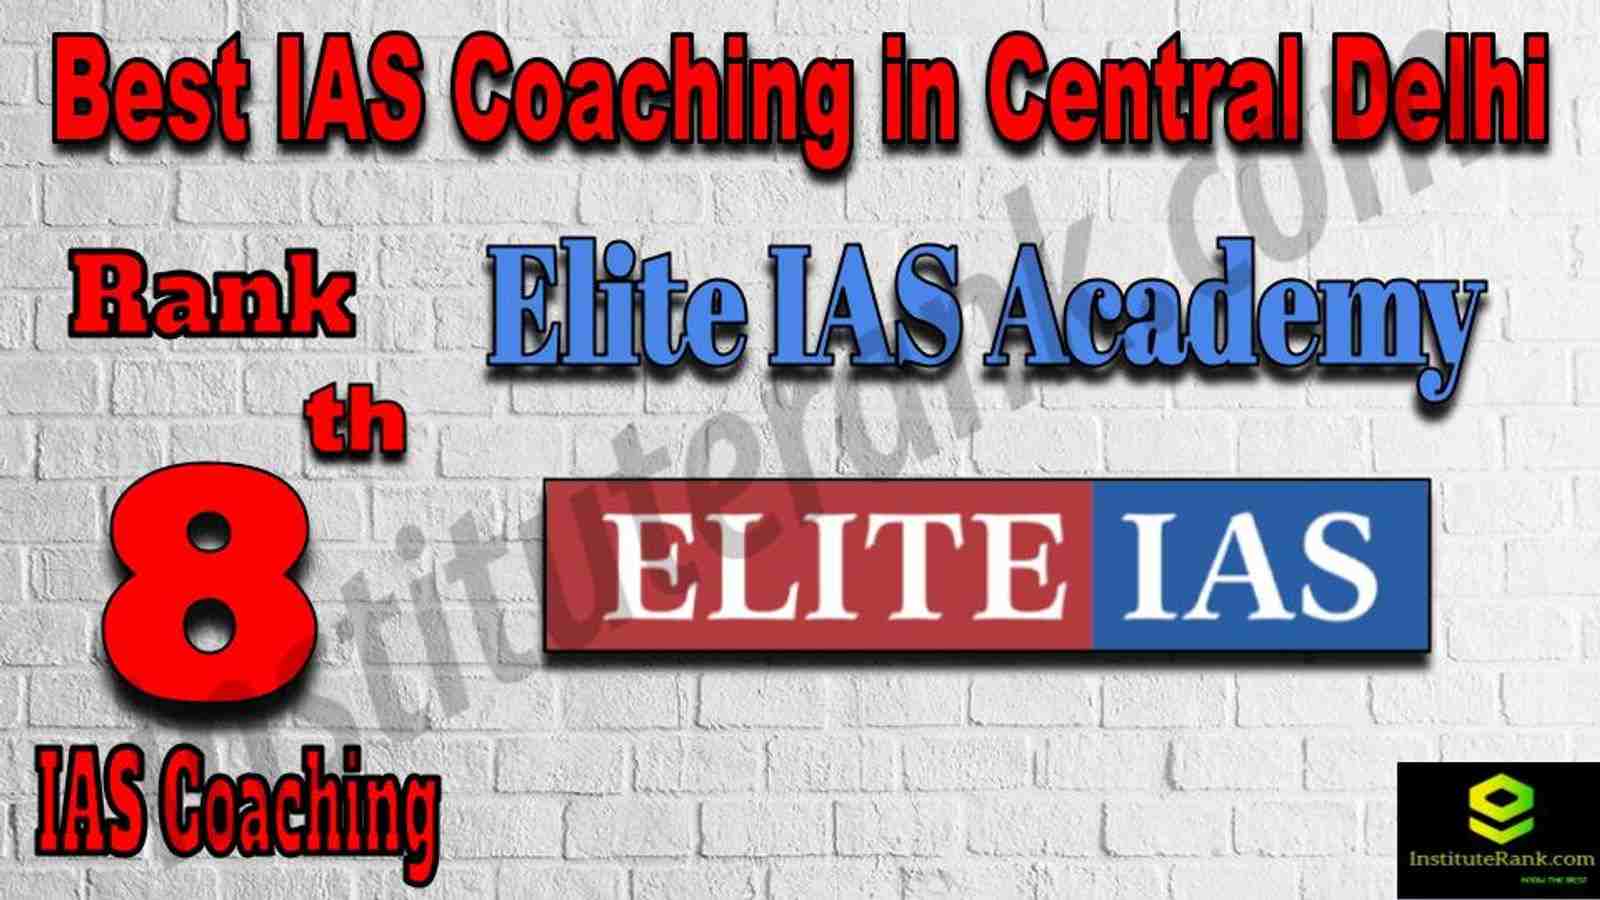 8th Best IAS Coaching in Central Delhi